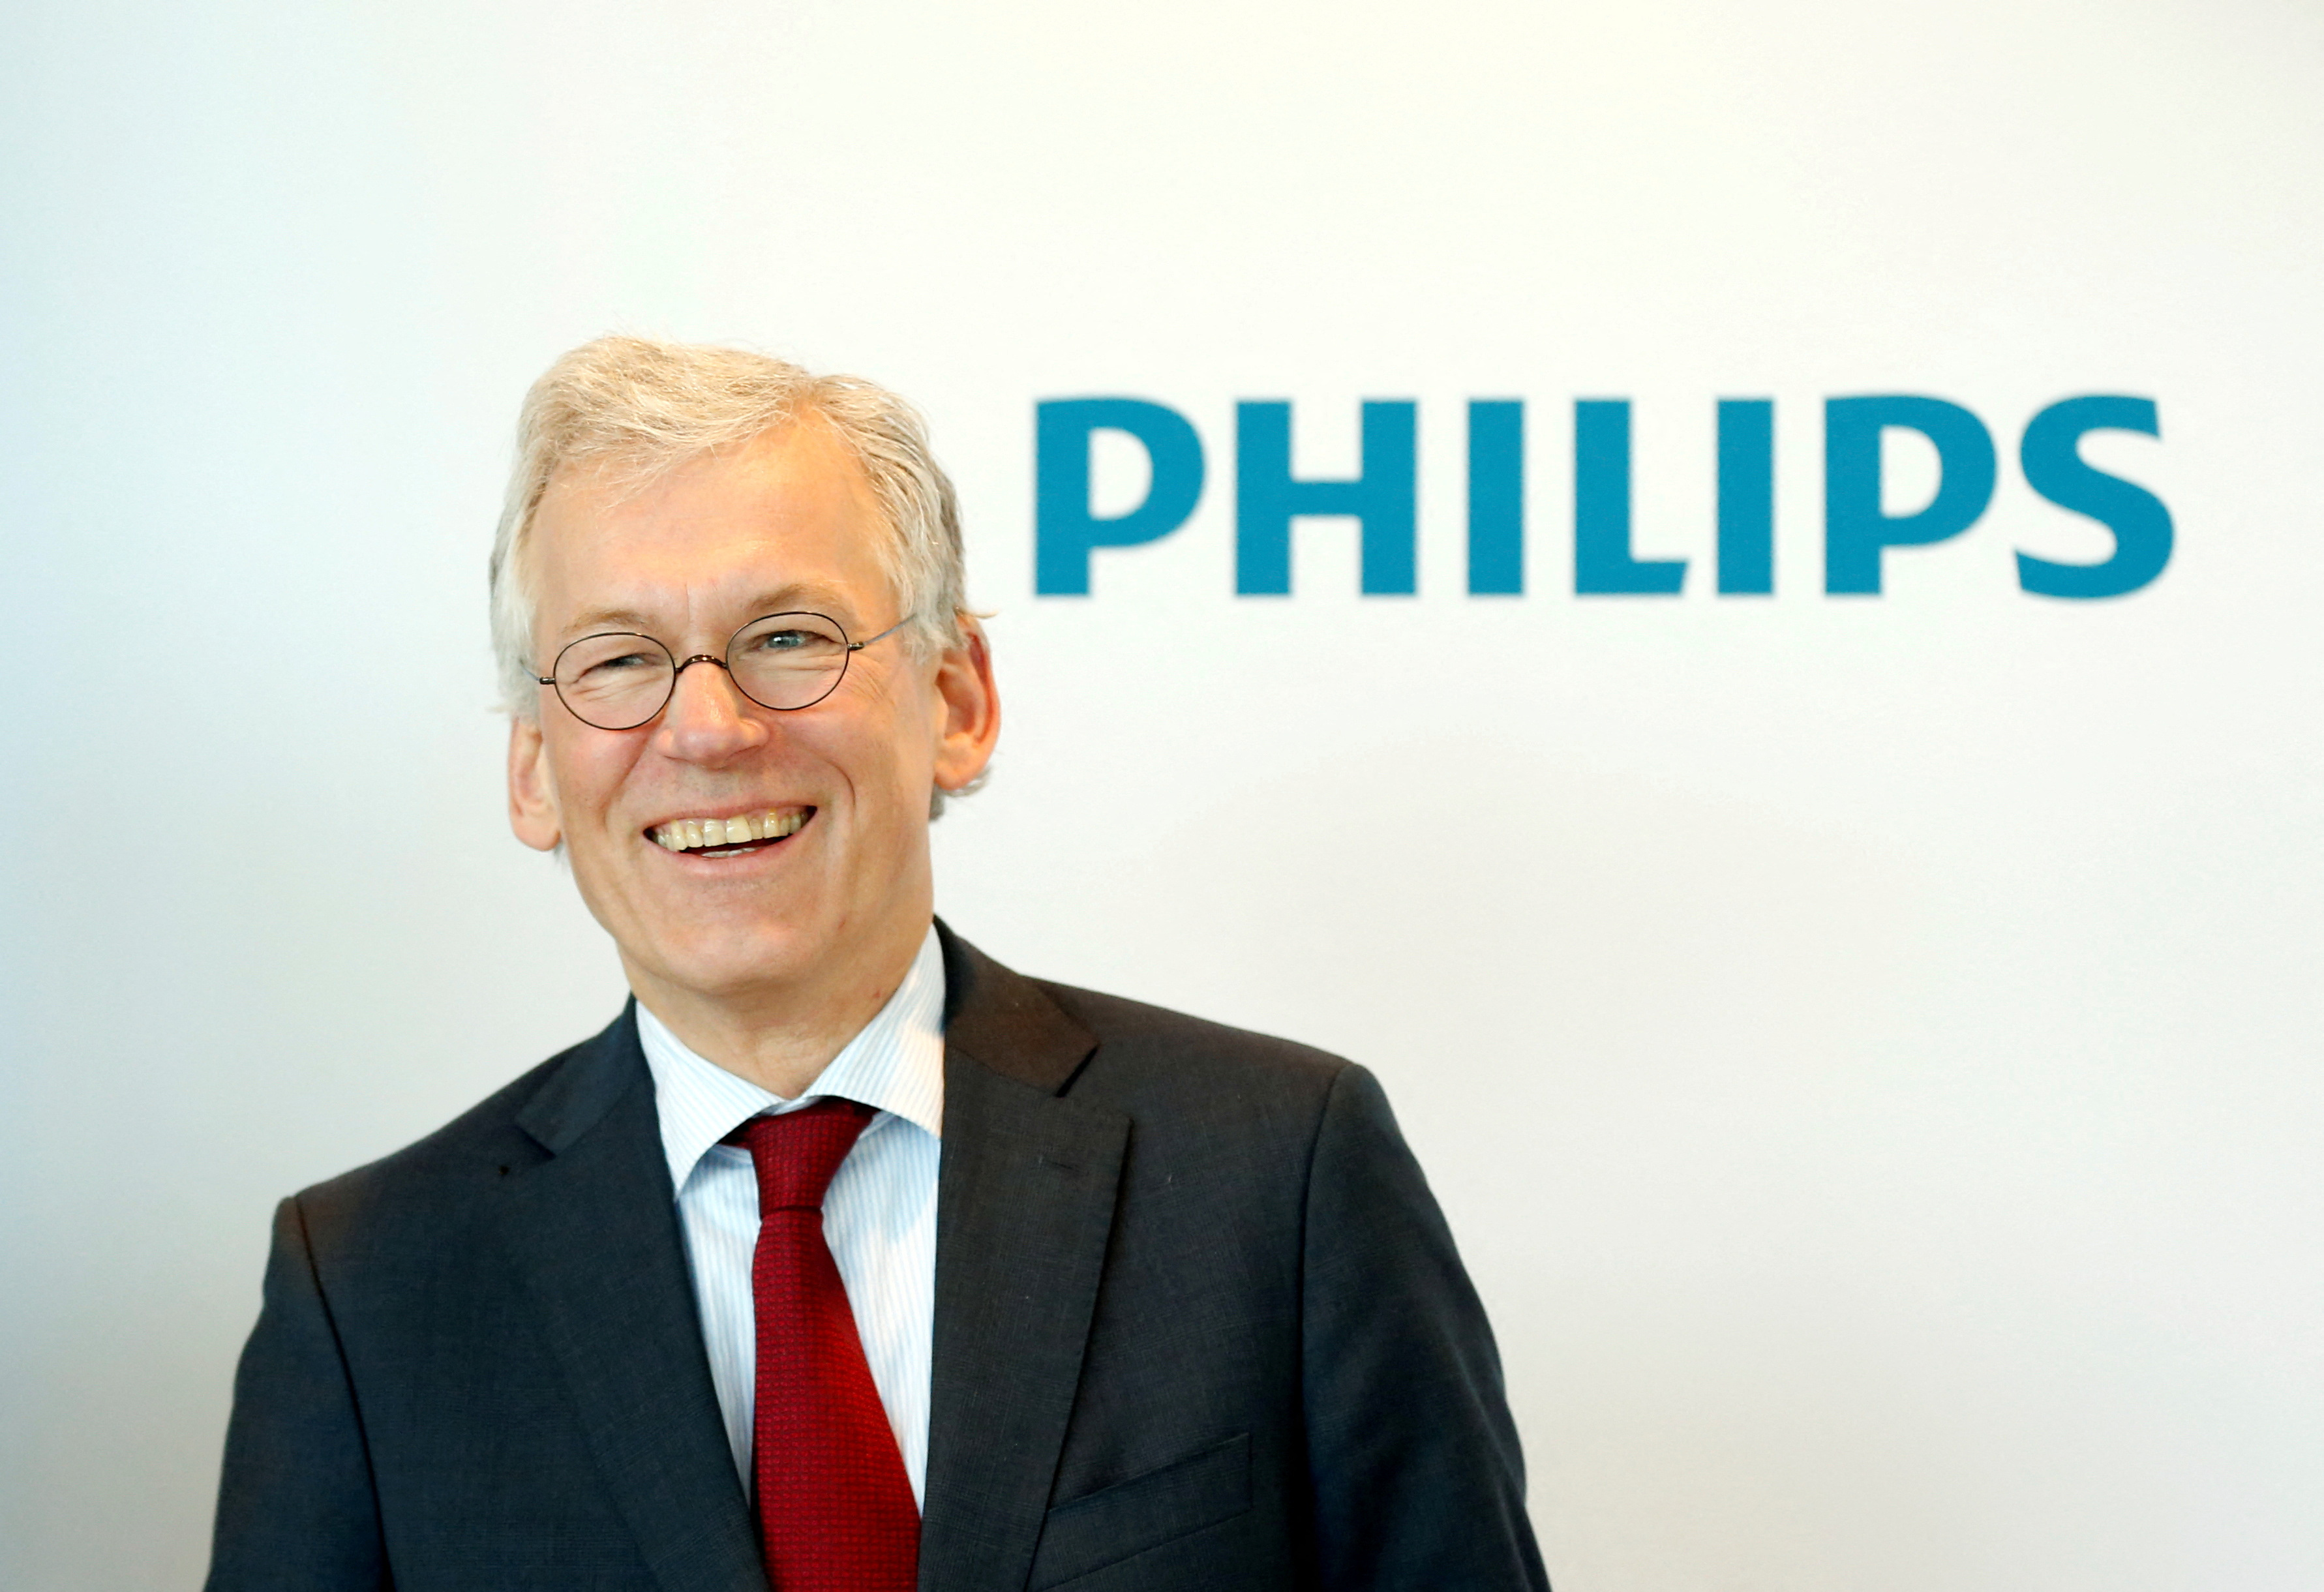 Dutch health technology company Philips presents the company's fourth quarter financial results in Amsterdam